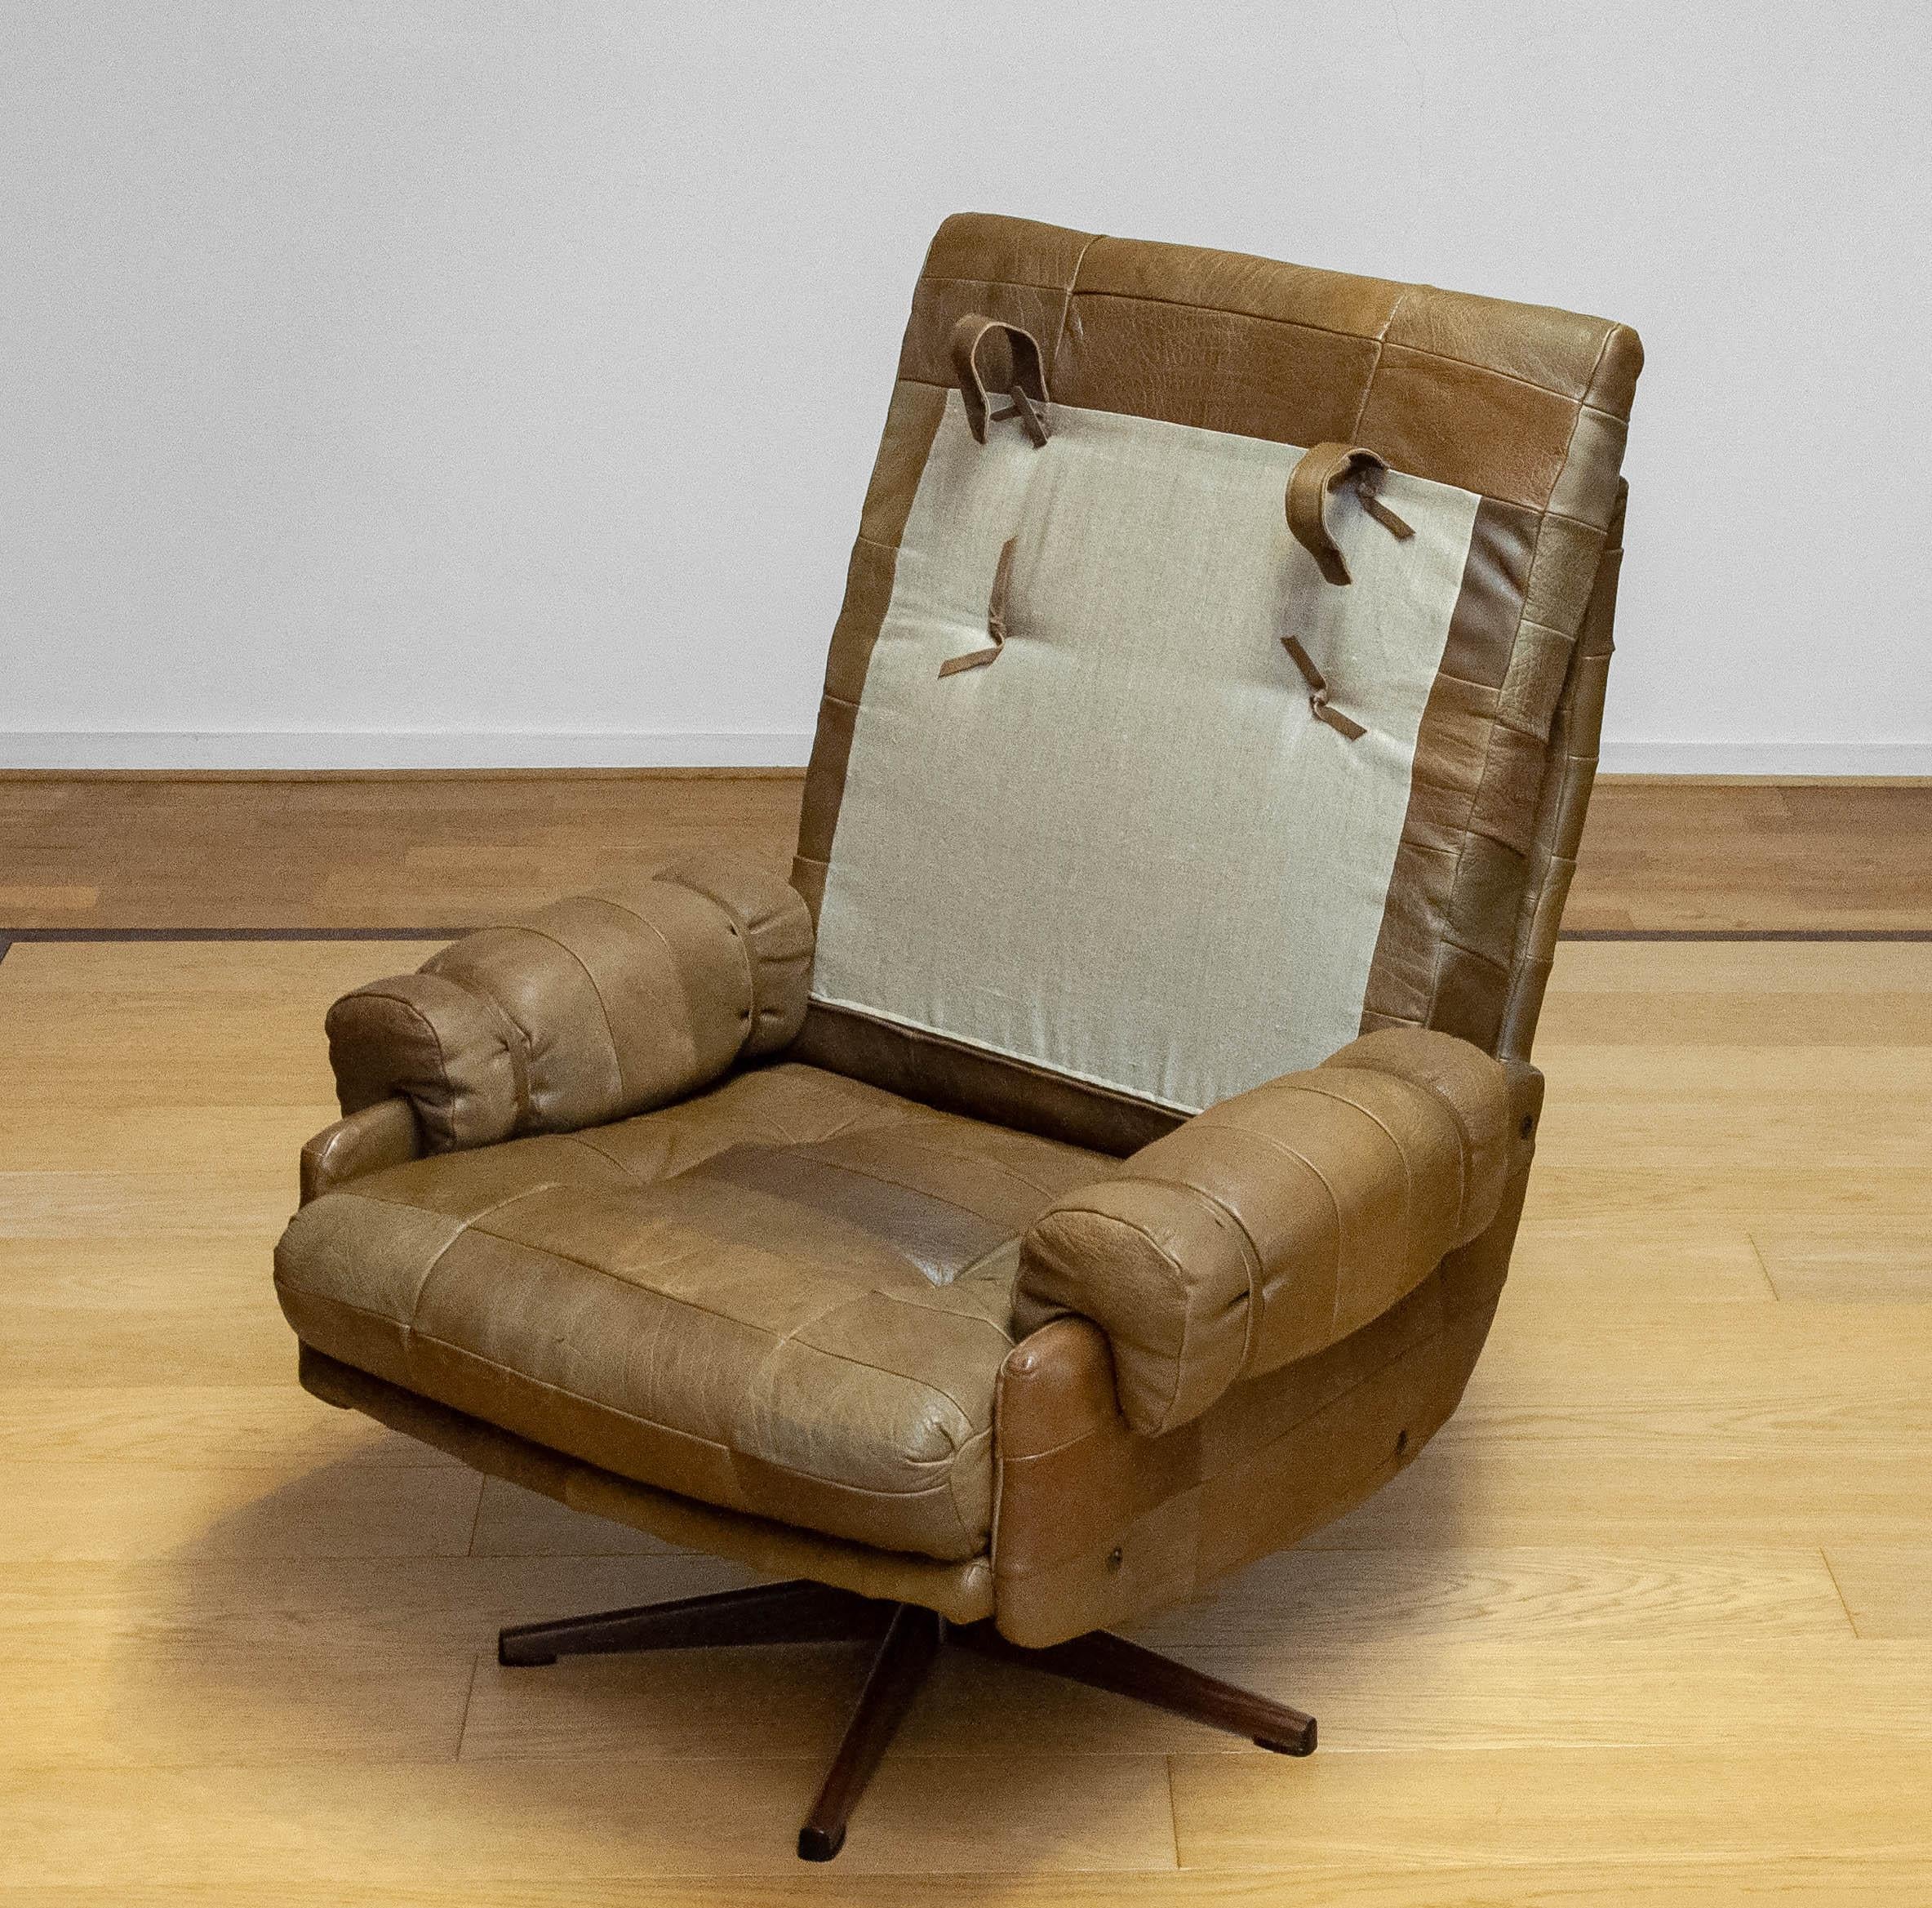 70s Swivel Chair By Arne Norell Möbel AB In Sturdy Olive Green Patchwork Leather For Sale 4